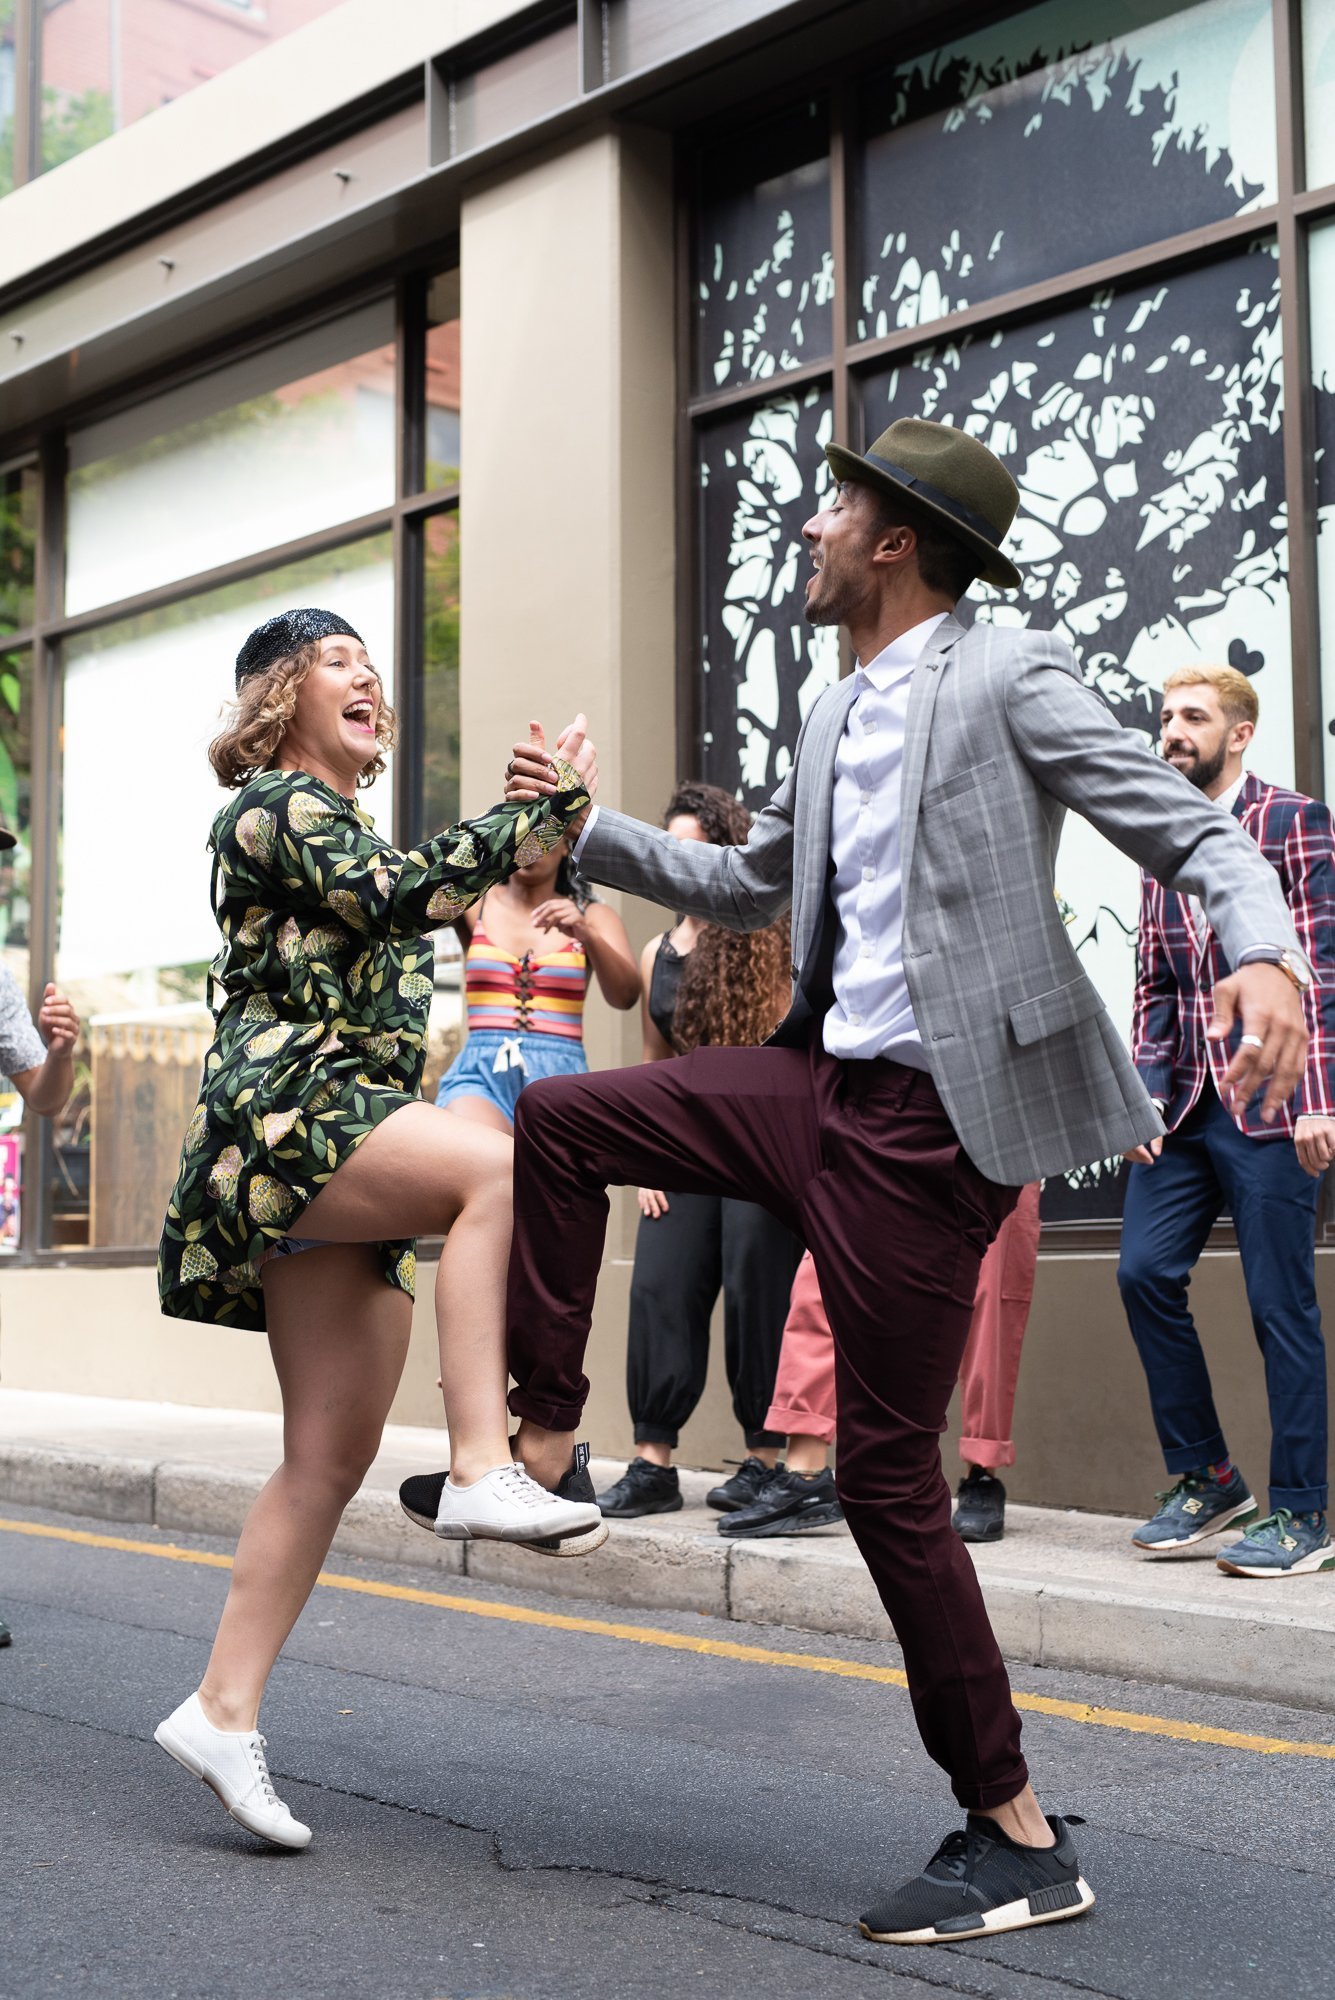 Dance off in Ebenezer Place wearing the latest fashion from boutiques on the strip